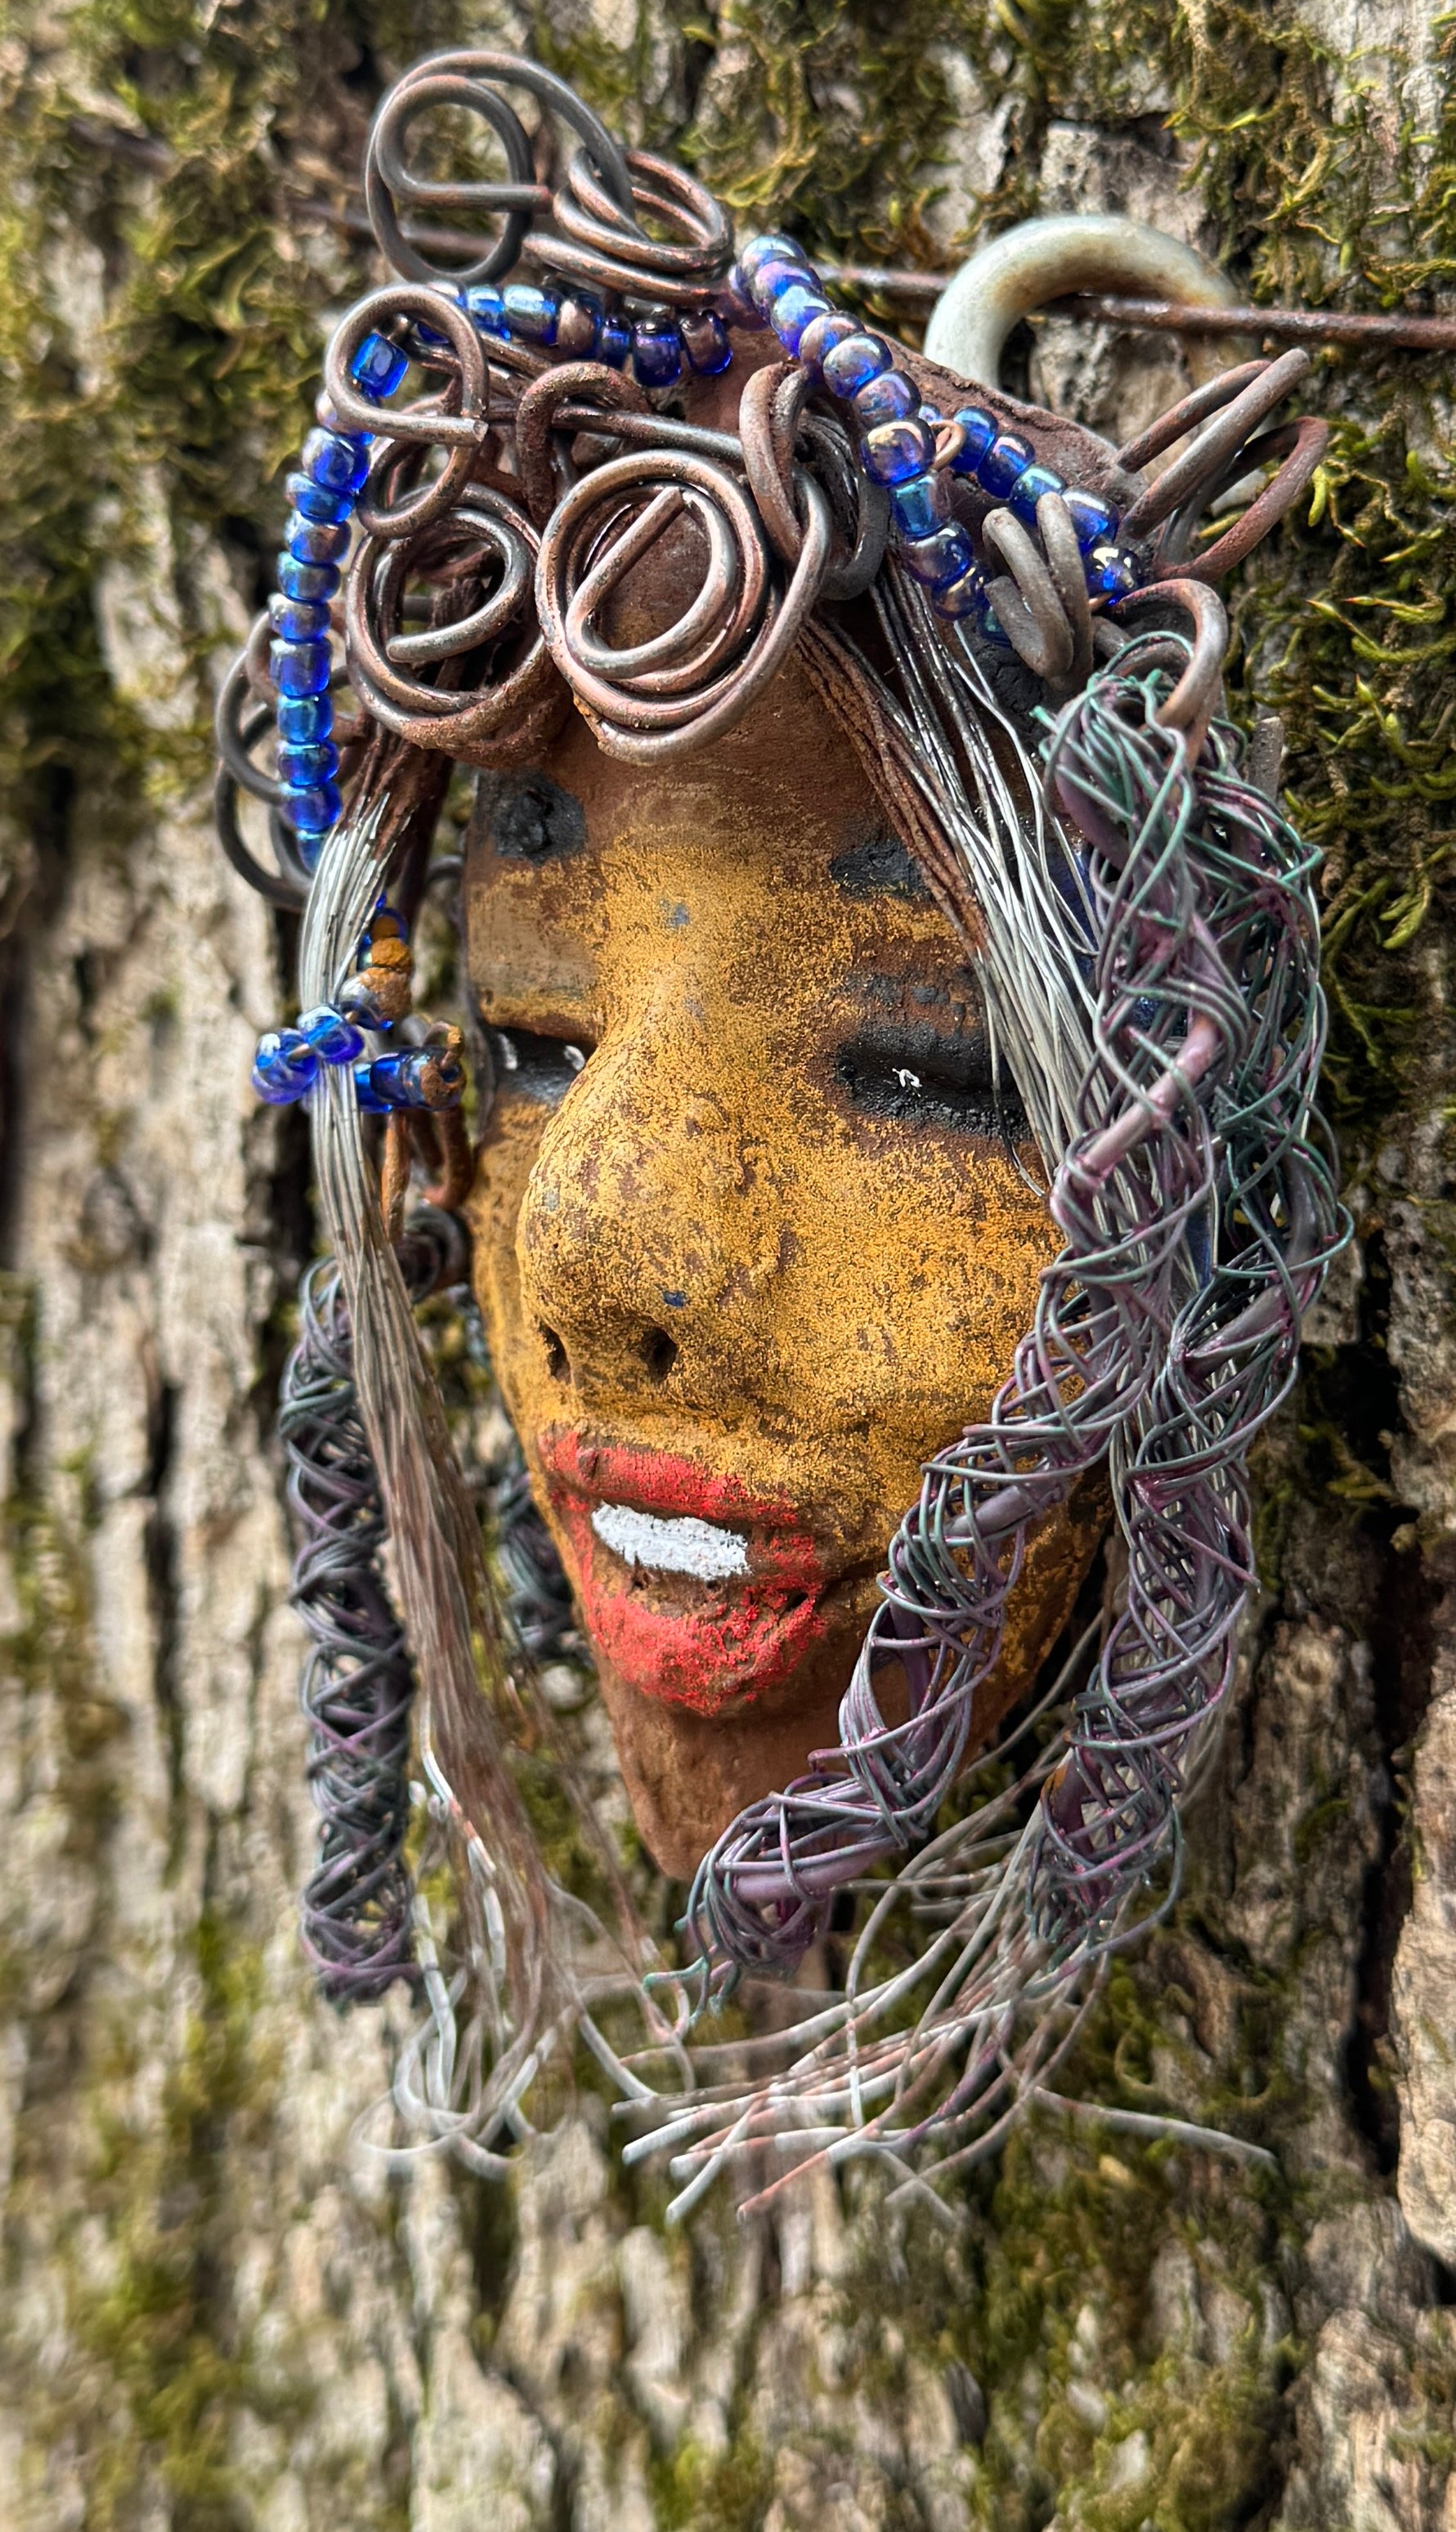 Agnes is a "4 x 6" raku mask displayed in a glass covered black shadowbox, accented with a beautiful two-tone honey brown complexion. Her intricate hair, made of 16 and 24 gauge wire, measures over 50 feet in length. With a contagious smile, Agnes adds a touch of elegance to any home decor.